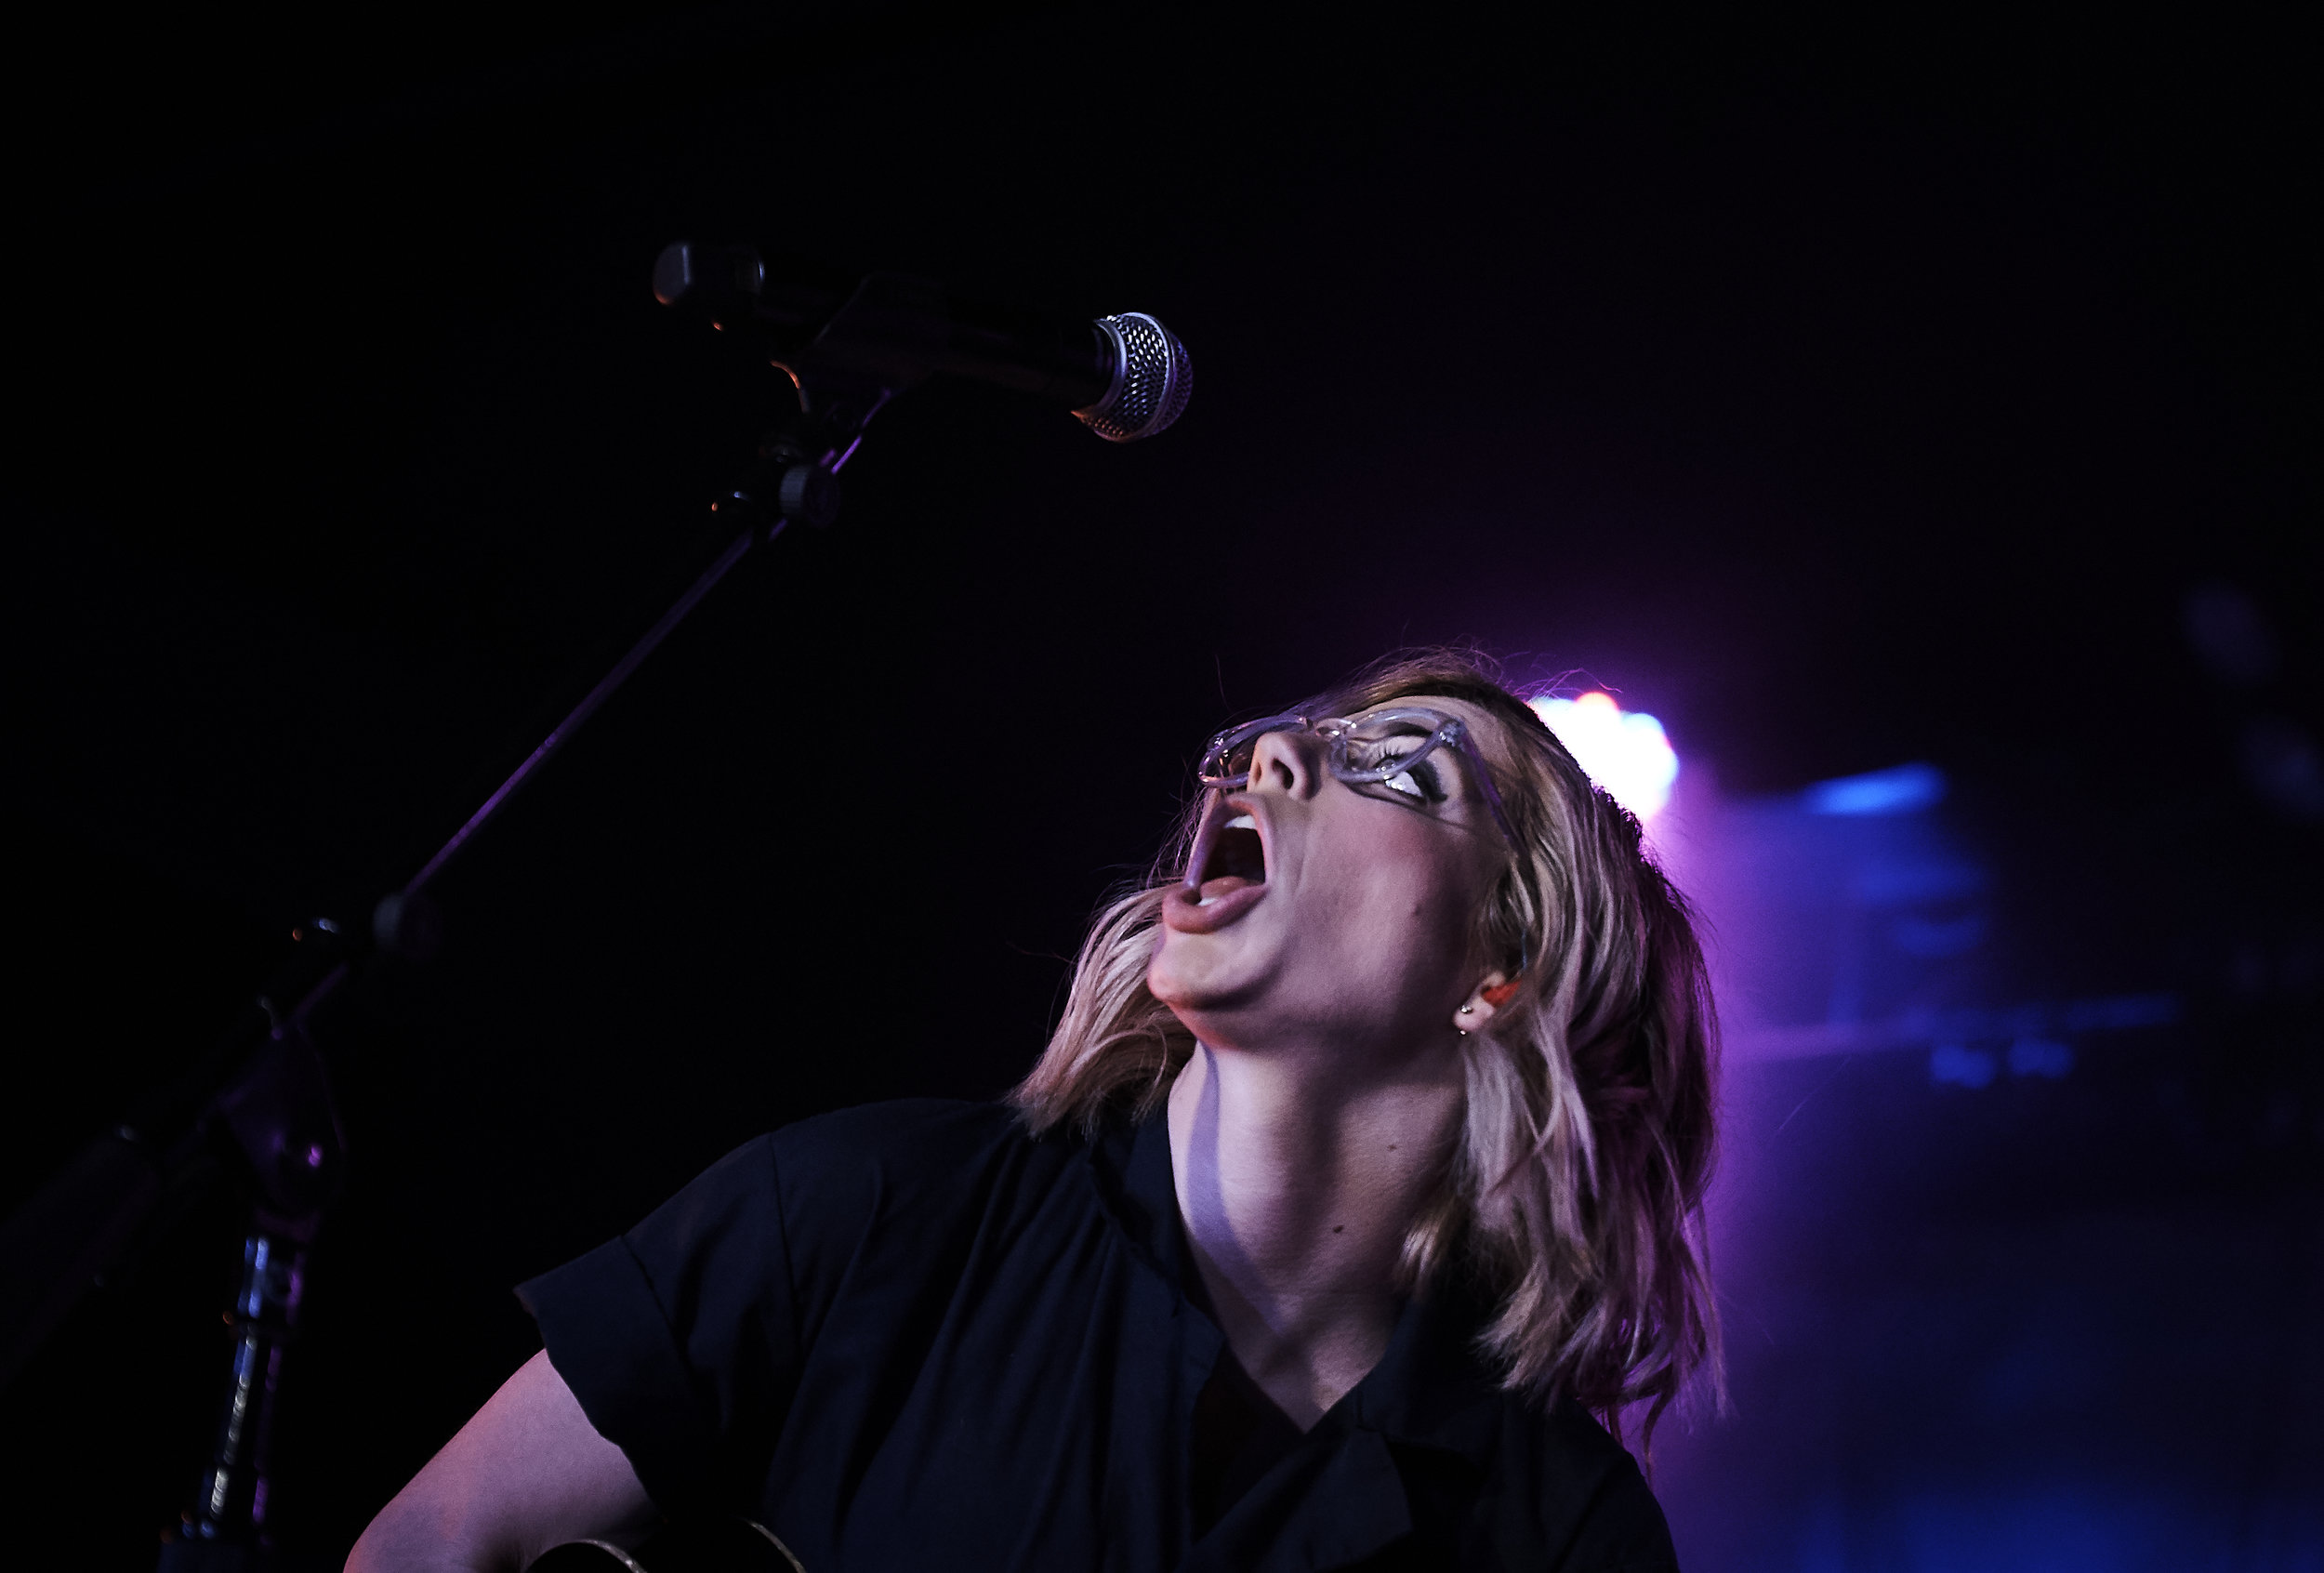    Josie Dunne   // 2019-04-24 //   Elevation   at   The Intersection   - Grand Rapids, MI // Photos by  Attila Hardy  